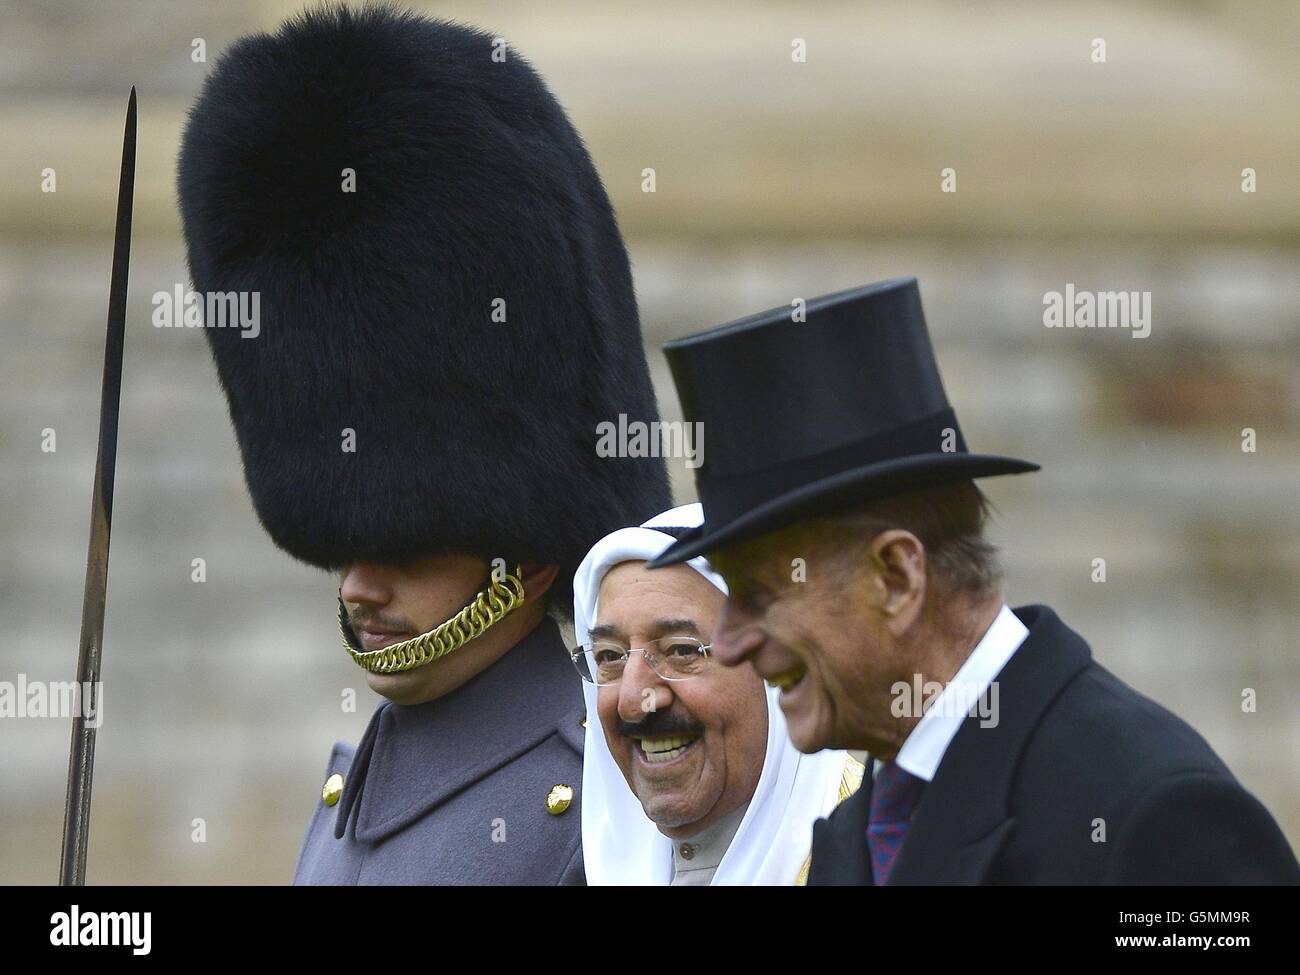 The Amir of the State of Kuwait, His Highness Sheikh Sabah Al-Ahmad Al-Jaber Al-Sabah, walks with the Duke of Edinburgh as they inspect members of the 1st Battalion Irish Guards, at Windsor Castle during the first day of his State Visit to the UK. Stock Photo